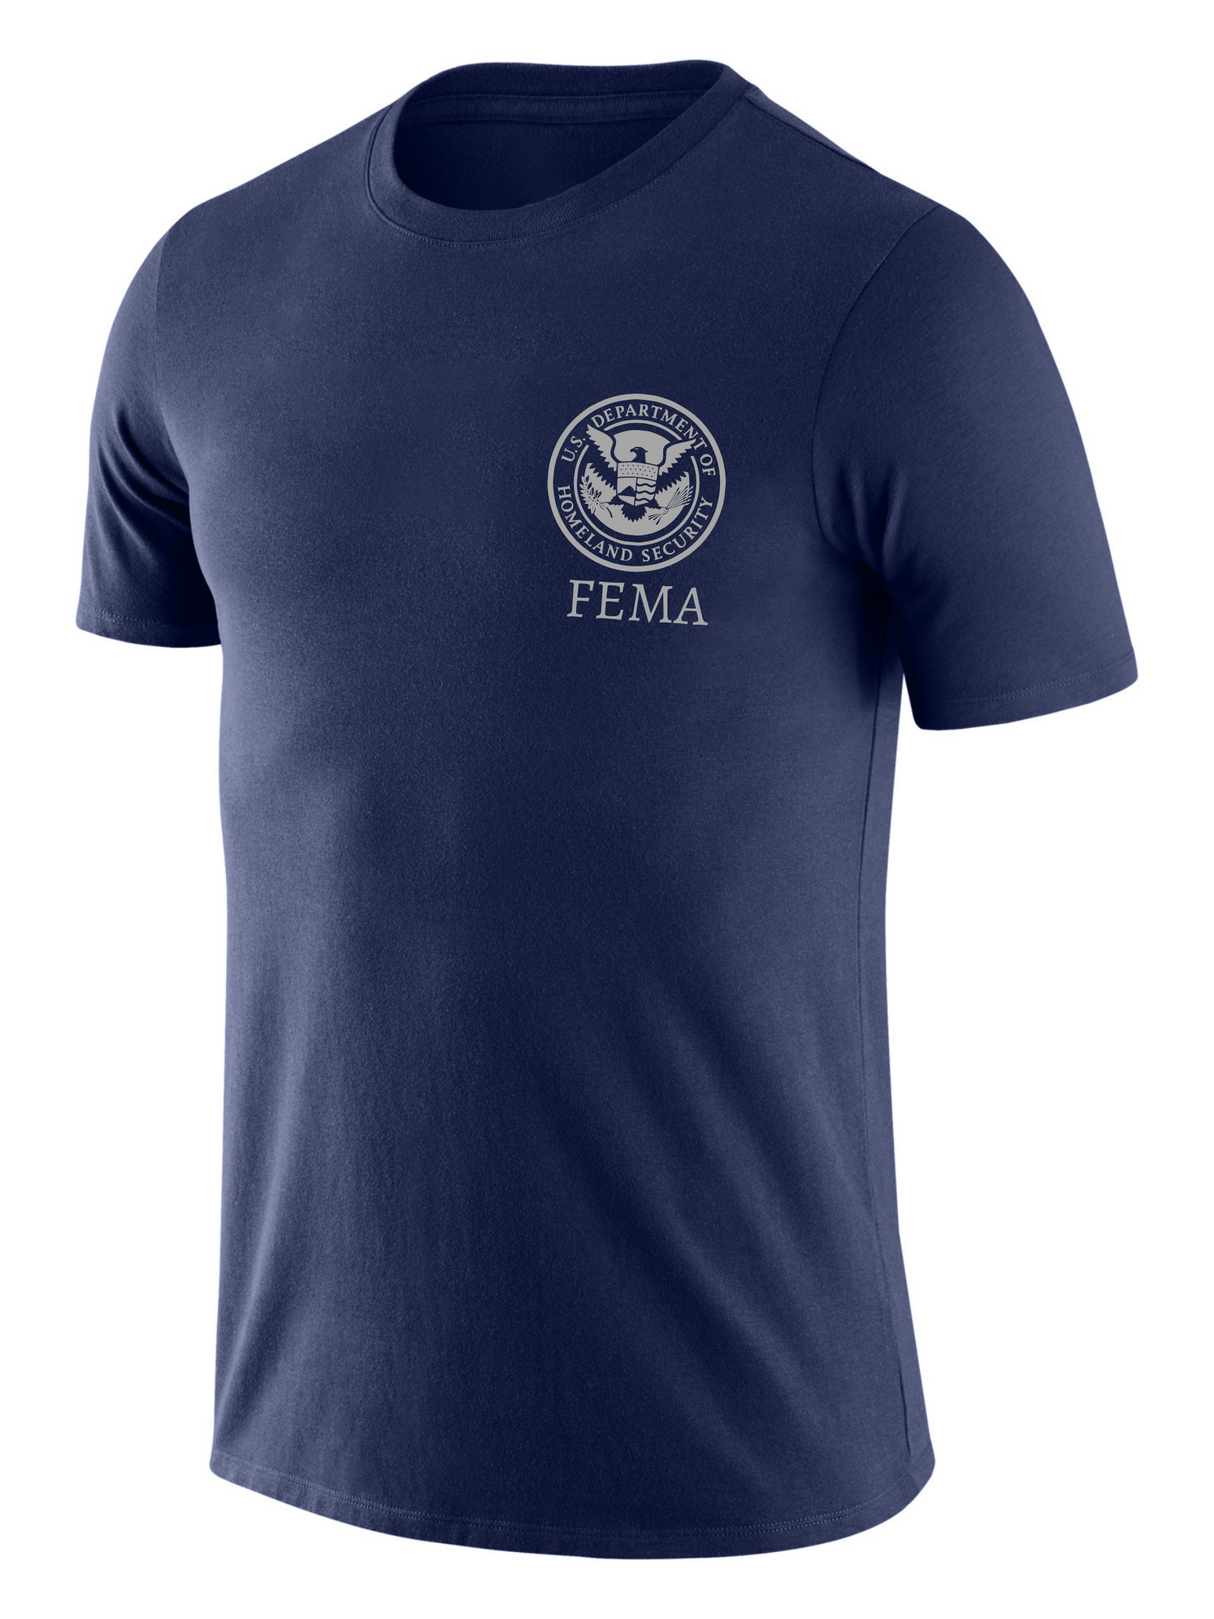 SUBDUED FEMA Disaster Relief Agency Identifier T Shirt - Short Sleeve - FEDS Apparel